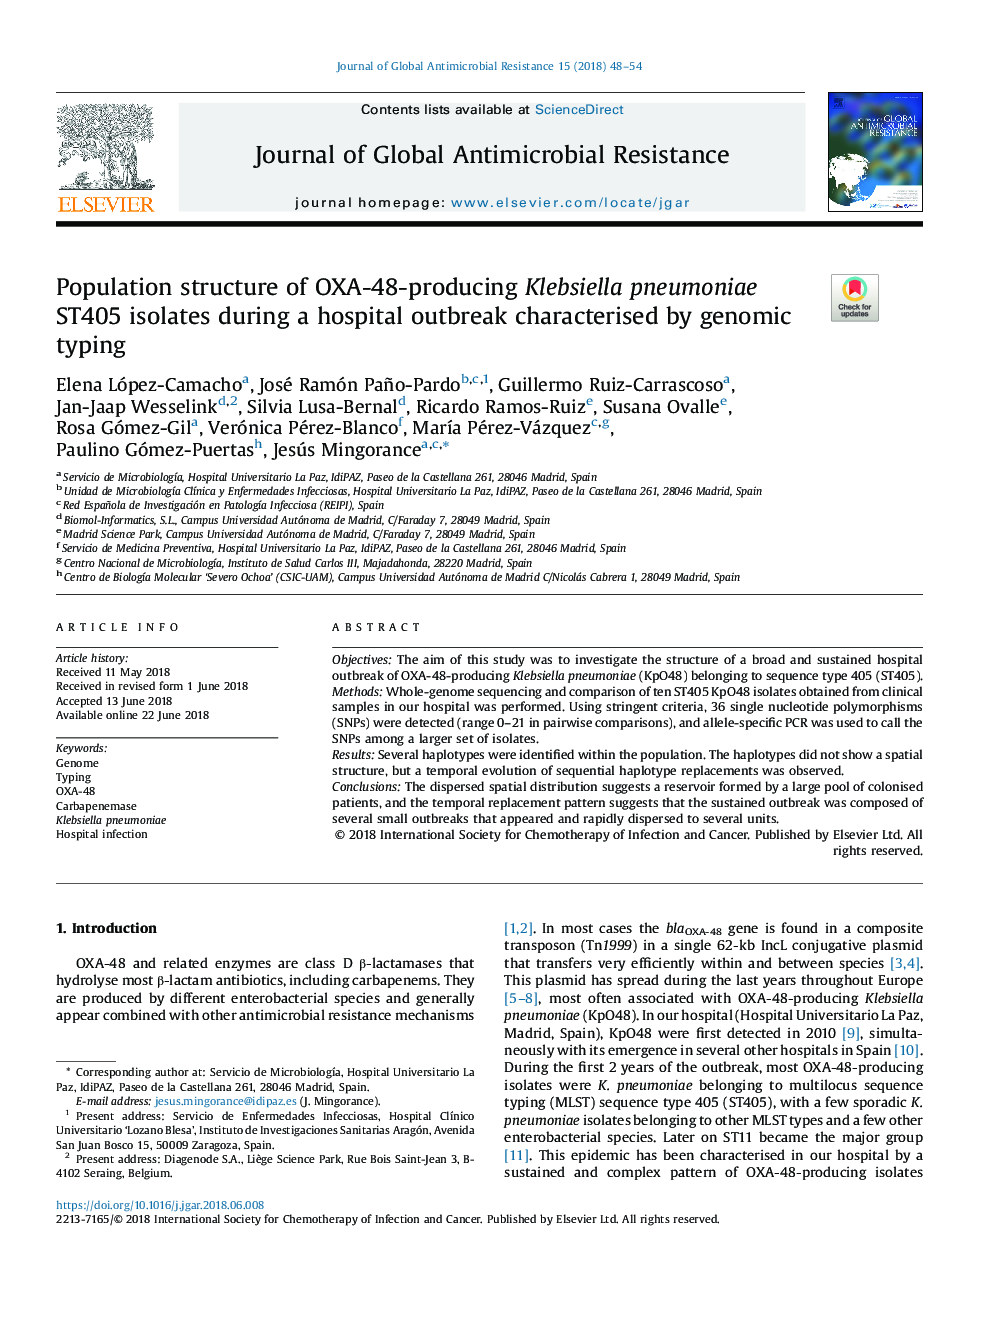 Population structure of OXA-48-producing Klebsiella pneumoniae ST405 isolates during a hospital outbreak characterised by genomic typing